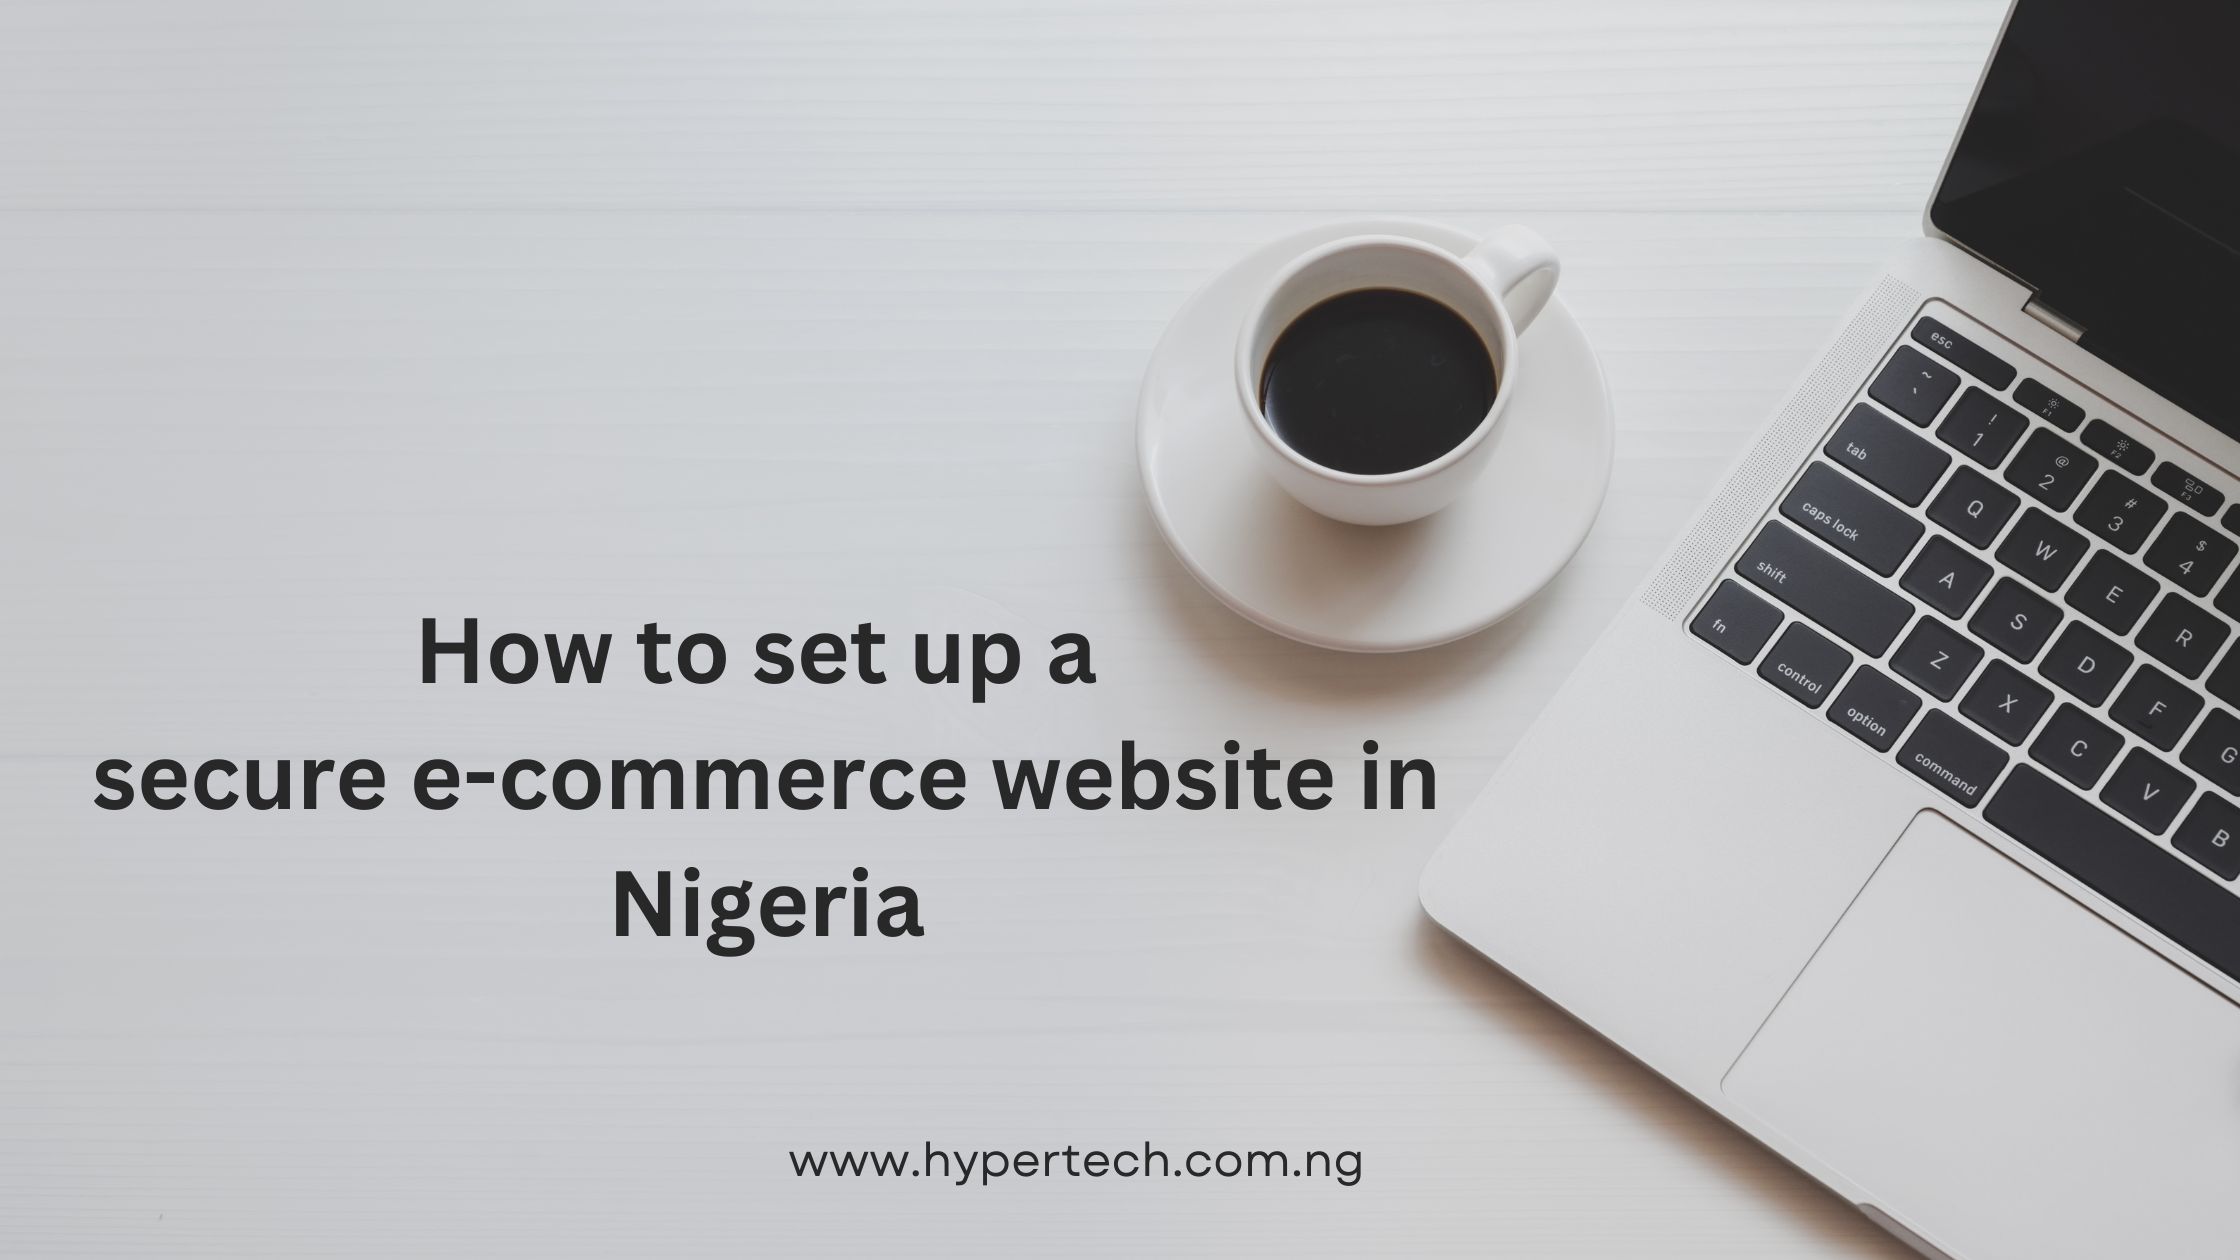 How to set up a secure e-commerce website in Nigeria